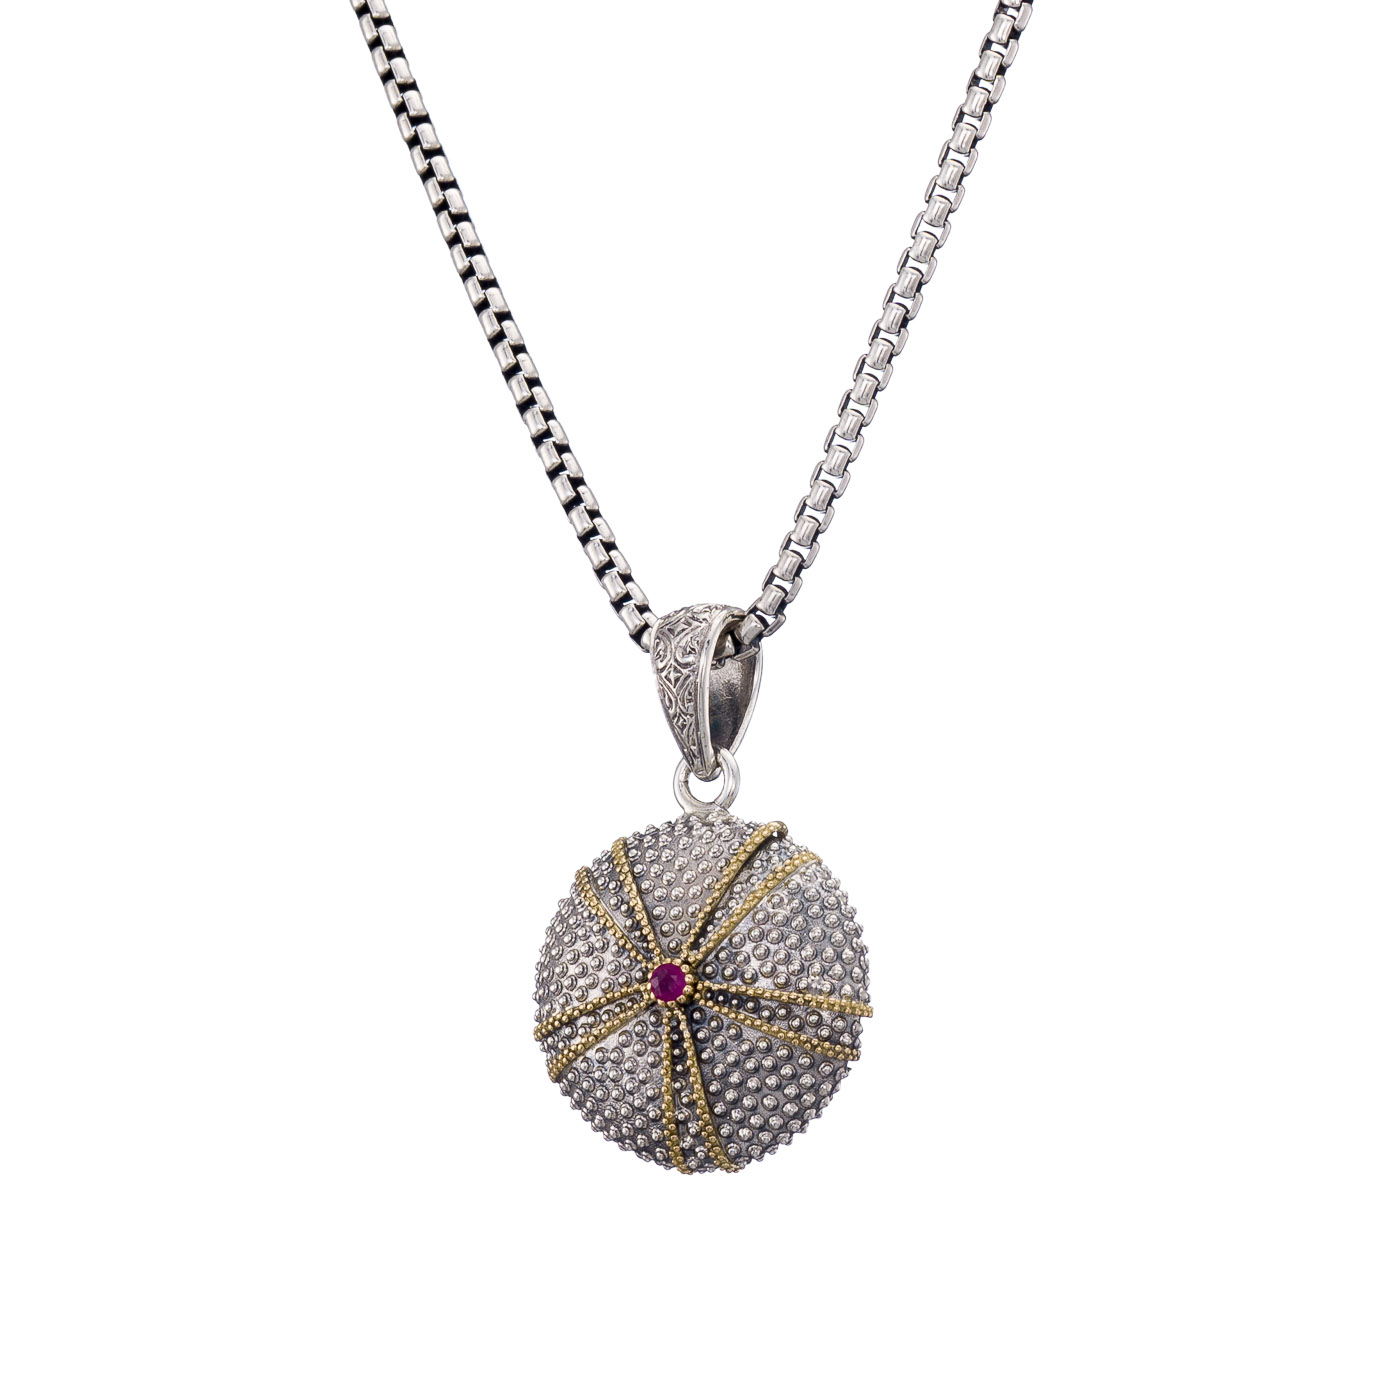 Sea Urchin Locket Pendant in 18K Gold and Sterling Silver with ruby